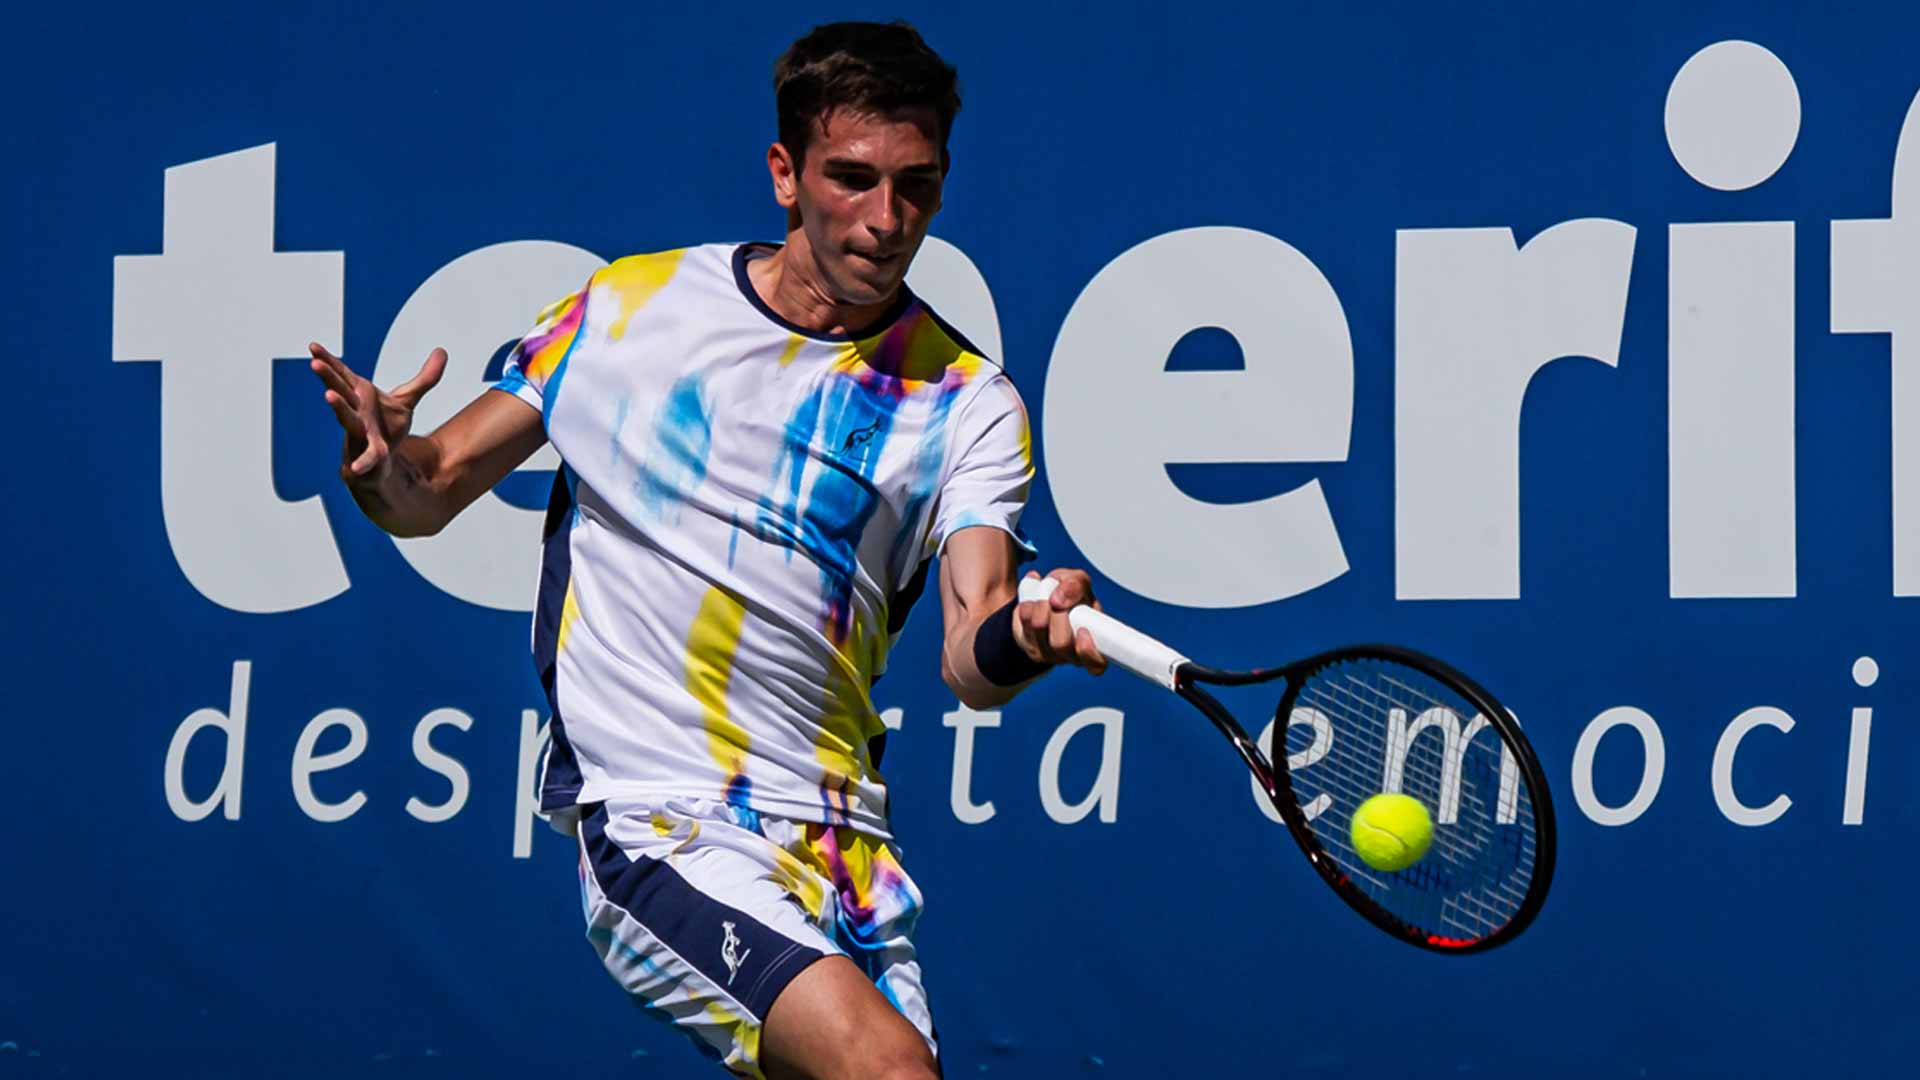 Matteo Gigante in action at the 2023 Tenerife Challenger-3.